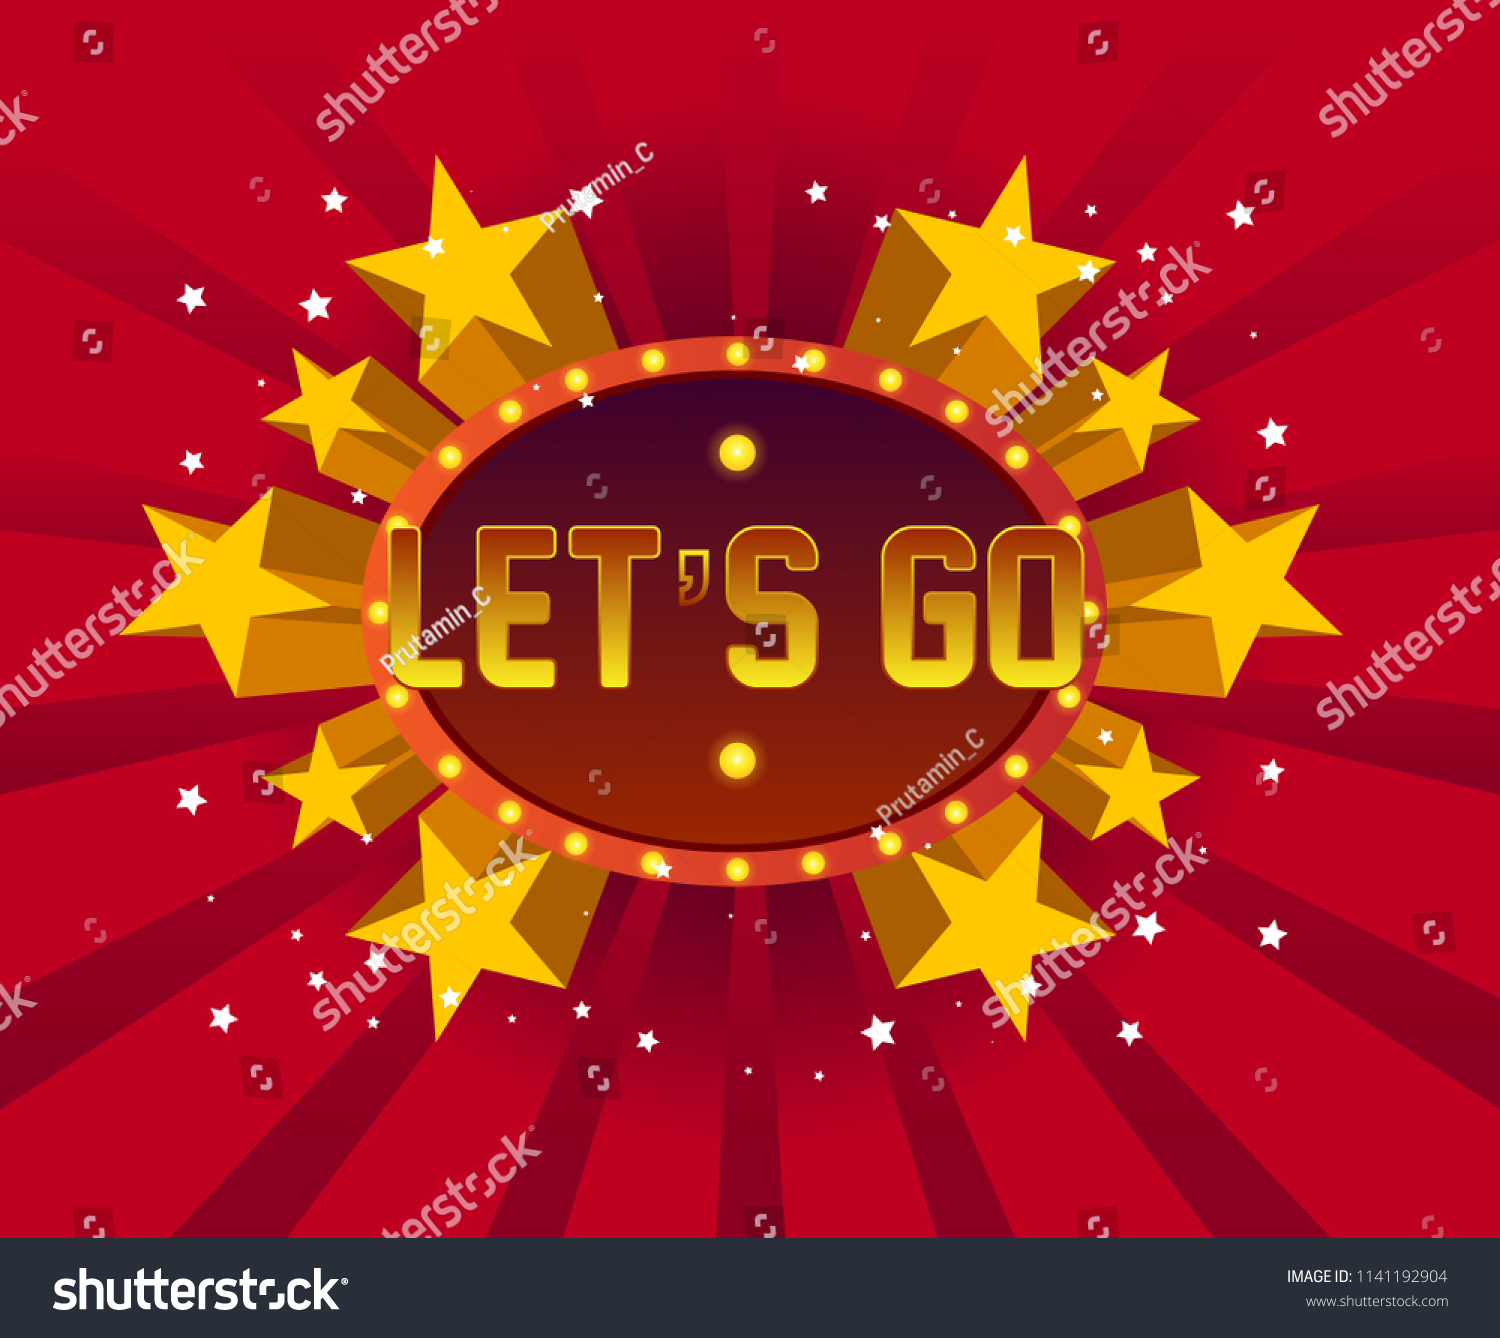 Lets Go Beautiful Greeting Card Background Stock Vector Royalty Free